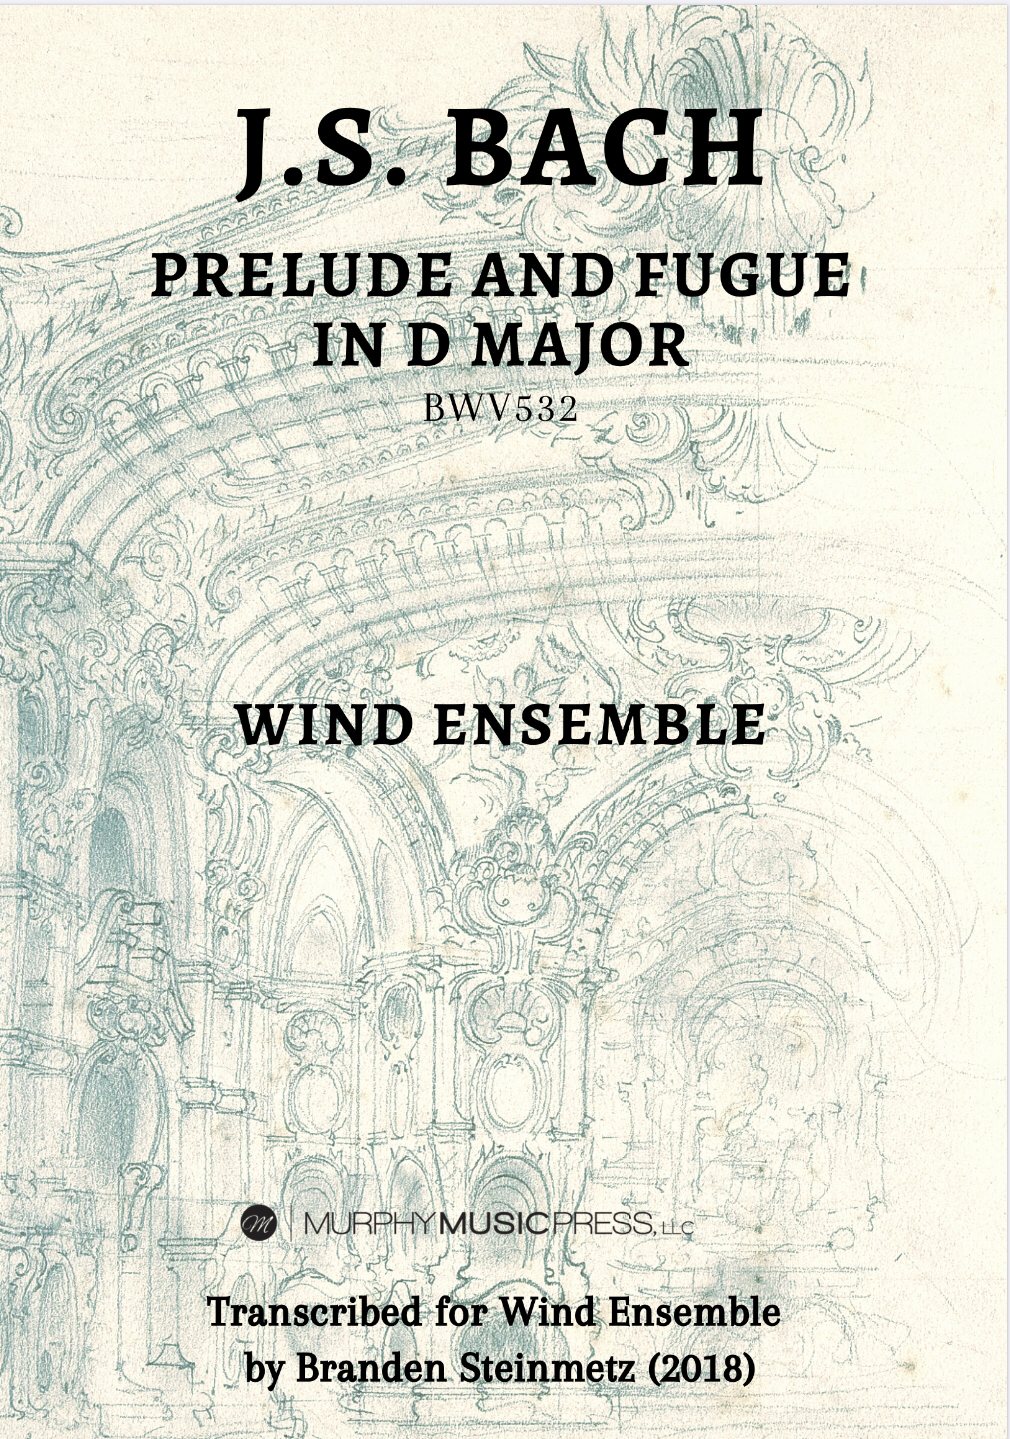 Prelude And Fugue In D Major, BWV 532 by Bach, arr. Steinmetz